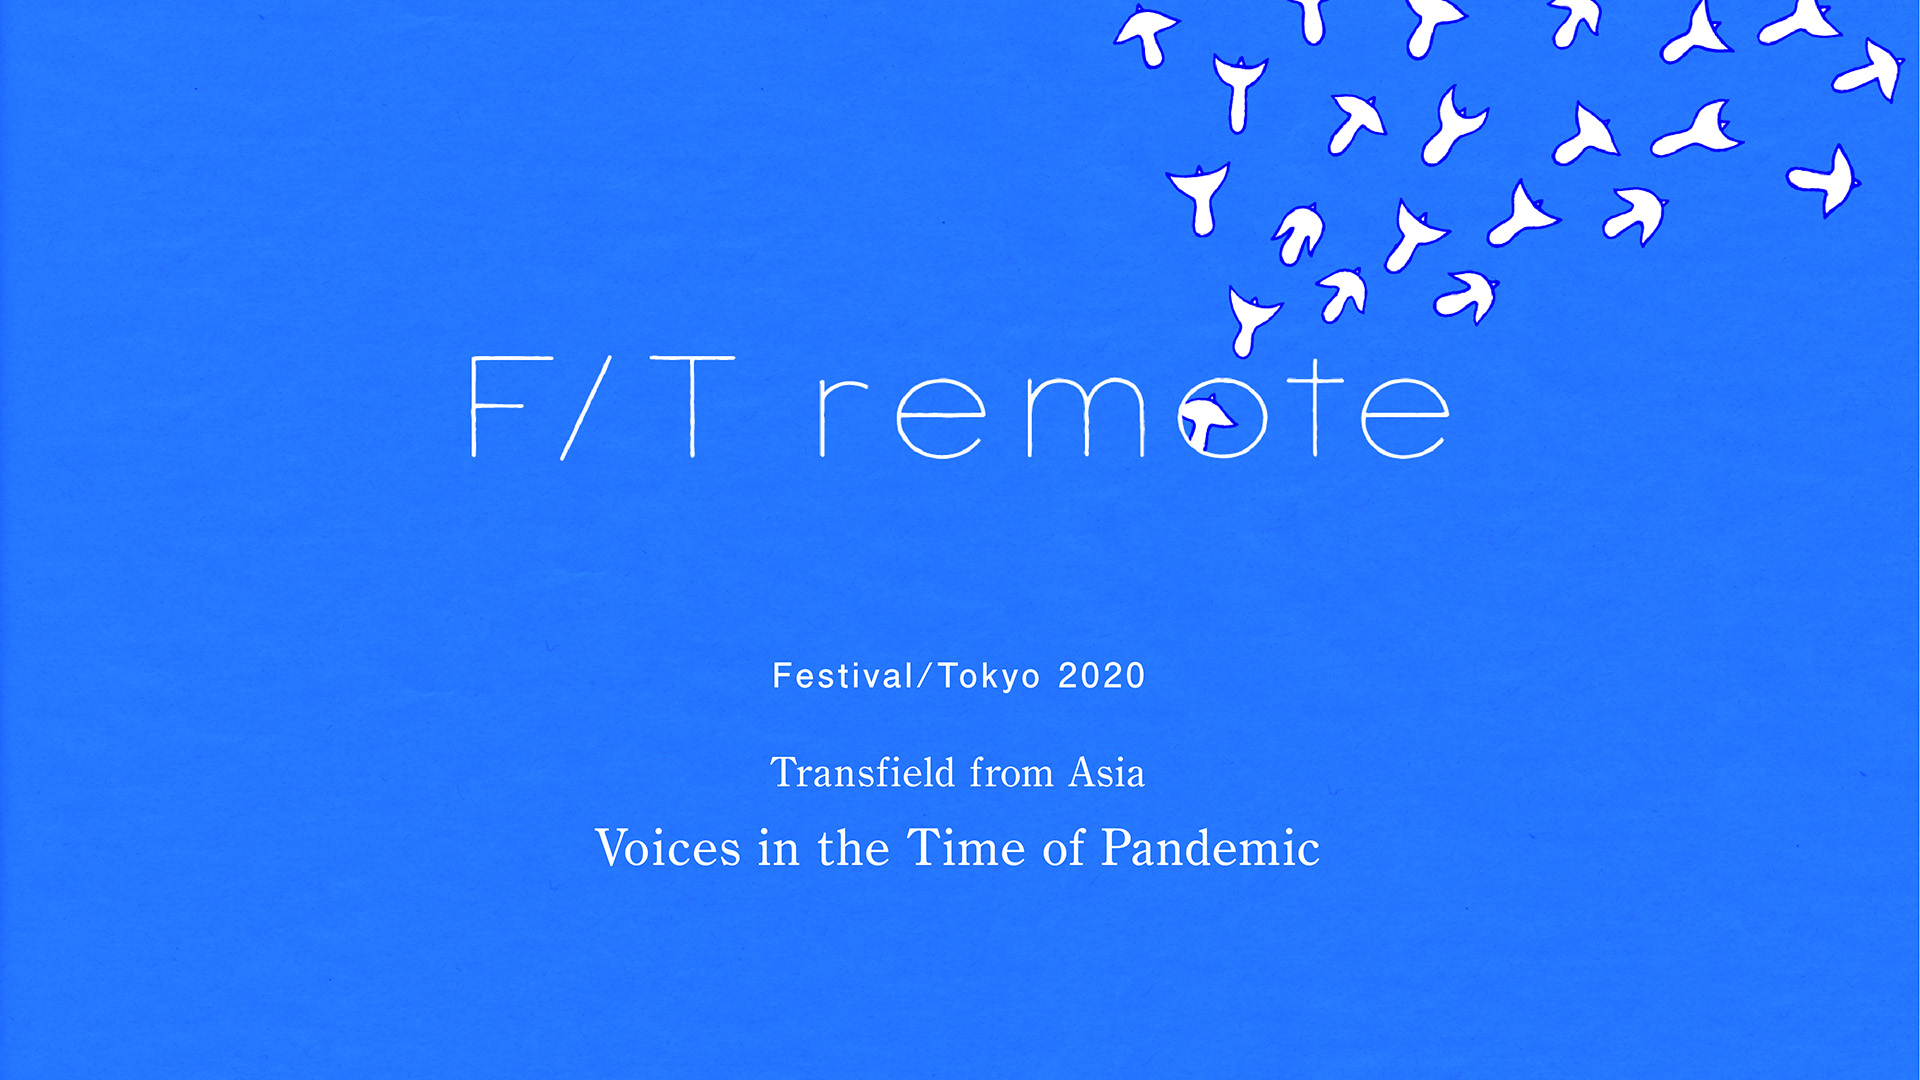 Voices in the Time of Pandemic